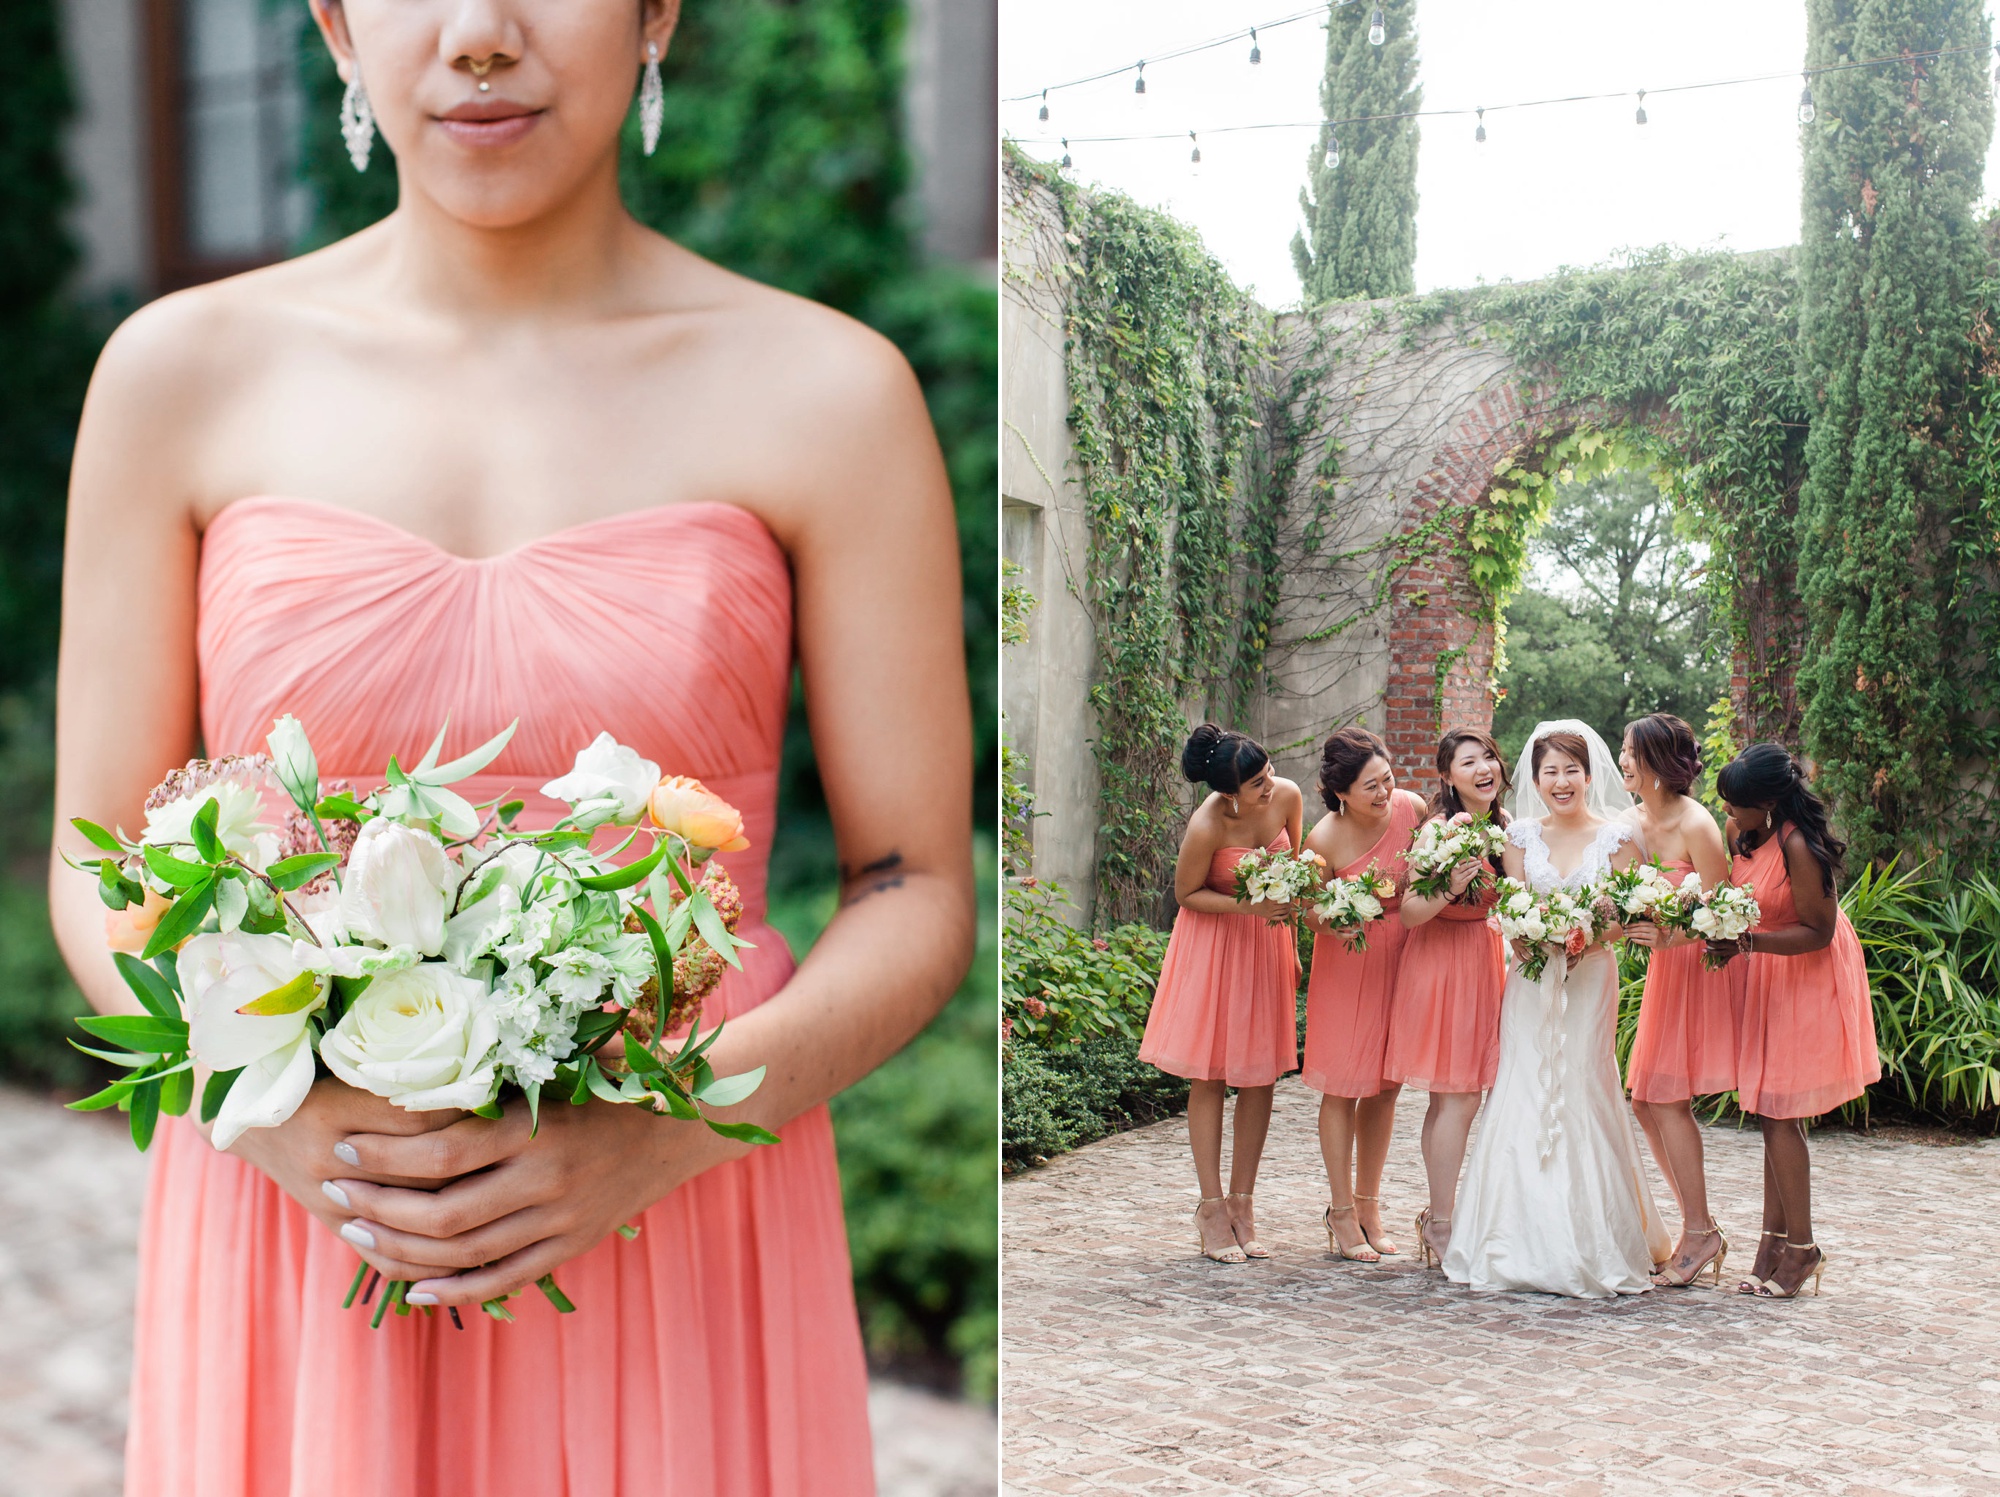 Delicate Amy Osaba florals, coral bridesmaids dresses and a stunning Summerour backdrop make for beautiful wedding images by Rebecca Cerasani.